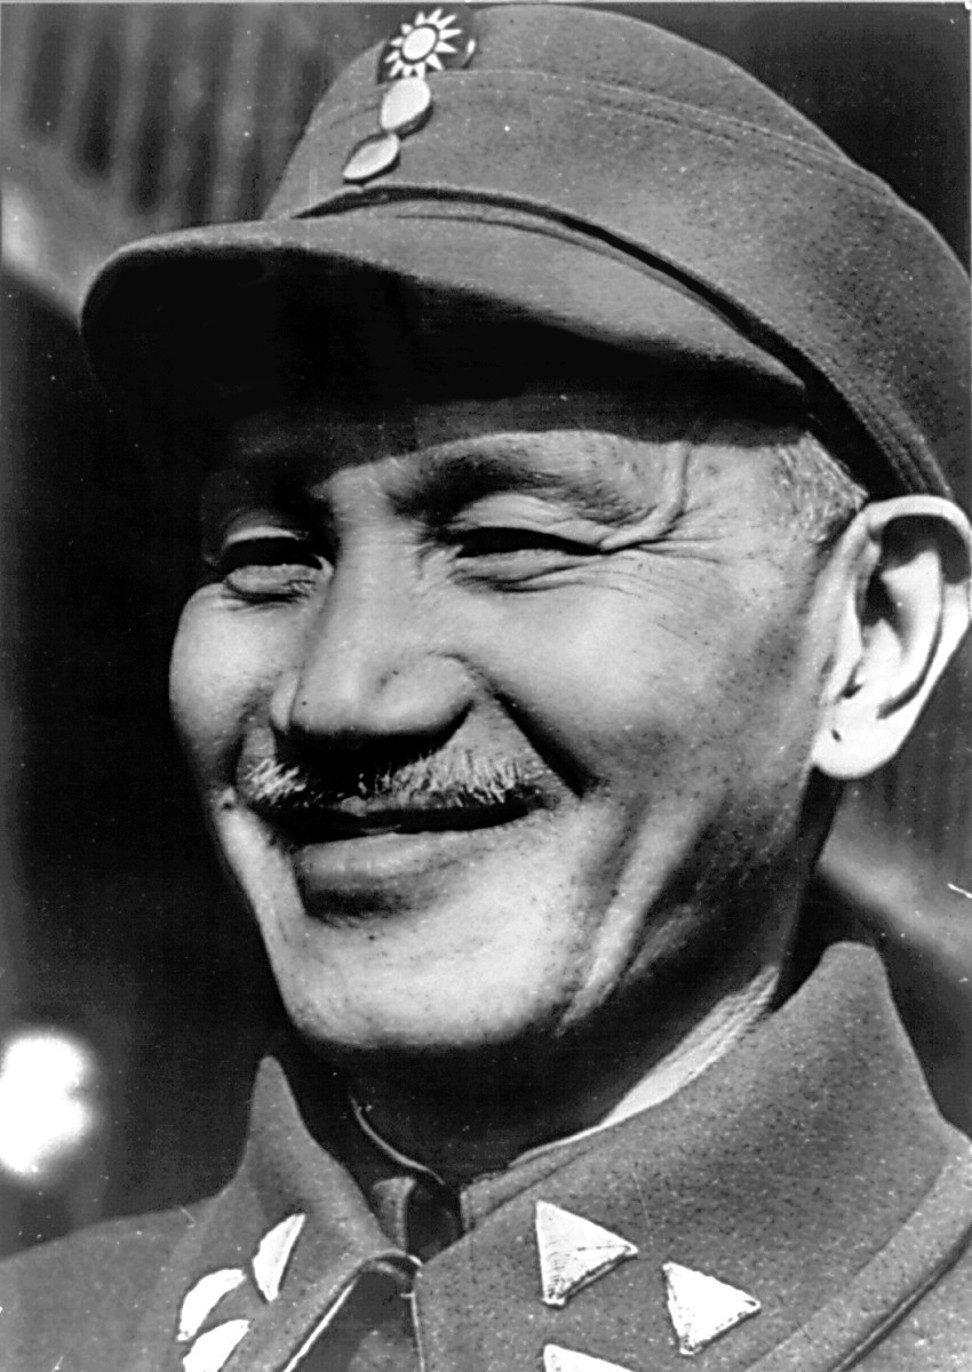 Michael J. Green argues that tens of thousands of men could have been saved had the US committed a few thousand advisors and a few hundred million dollars in additional aid to Chiang Kai-shek (pictured) in 1947.